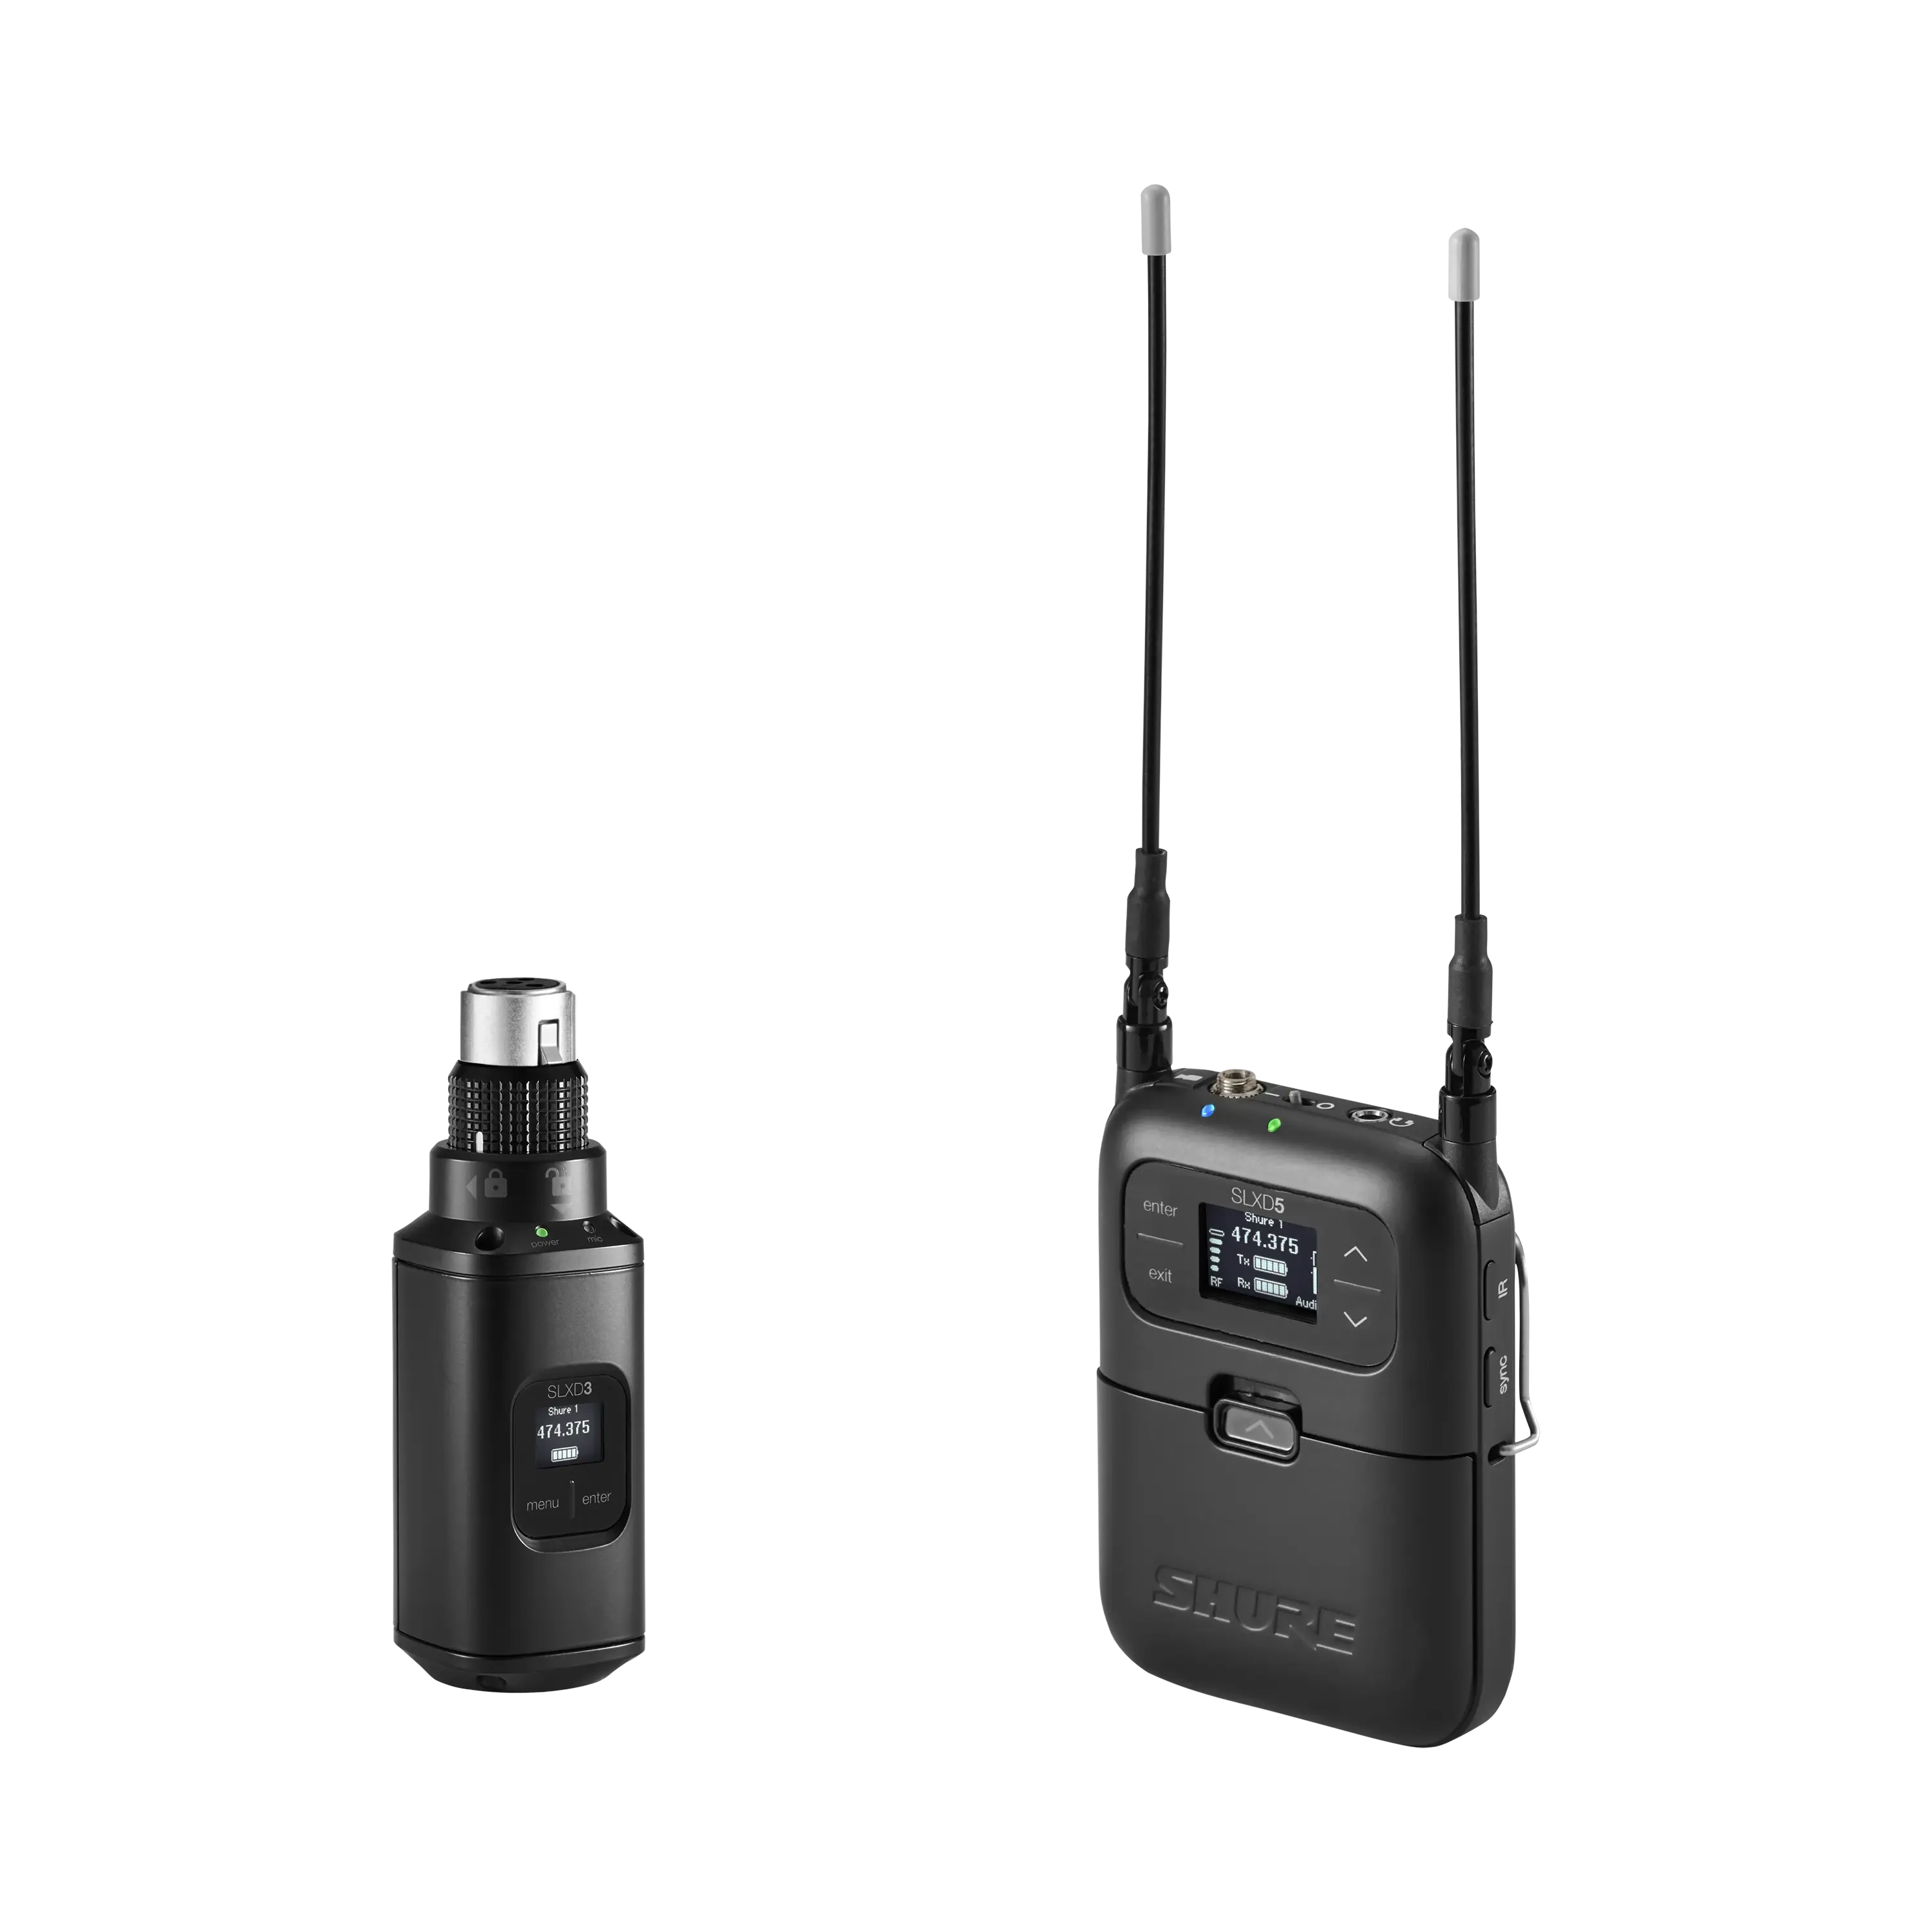 SLXD35-H55 Portable Wireless System With Plug-On Transmitter